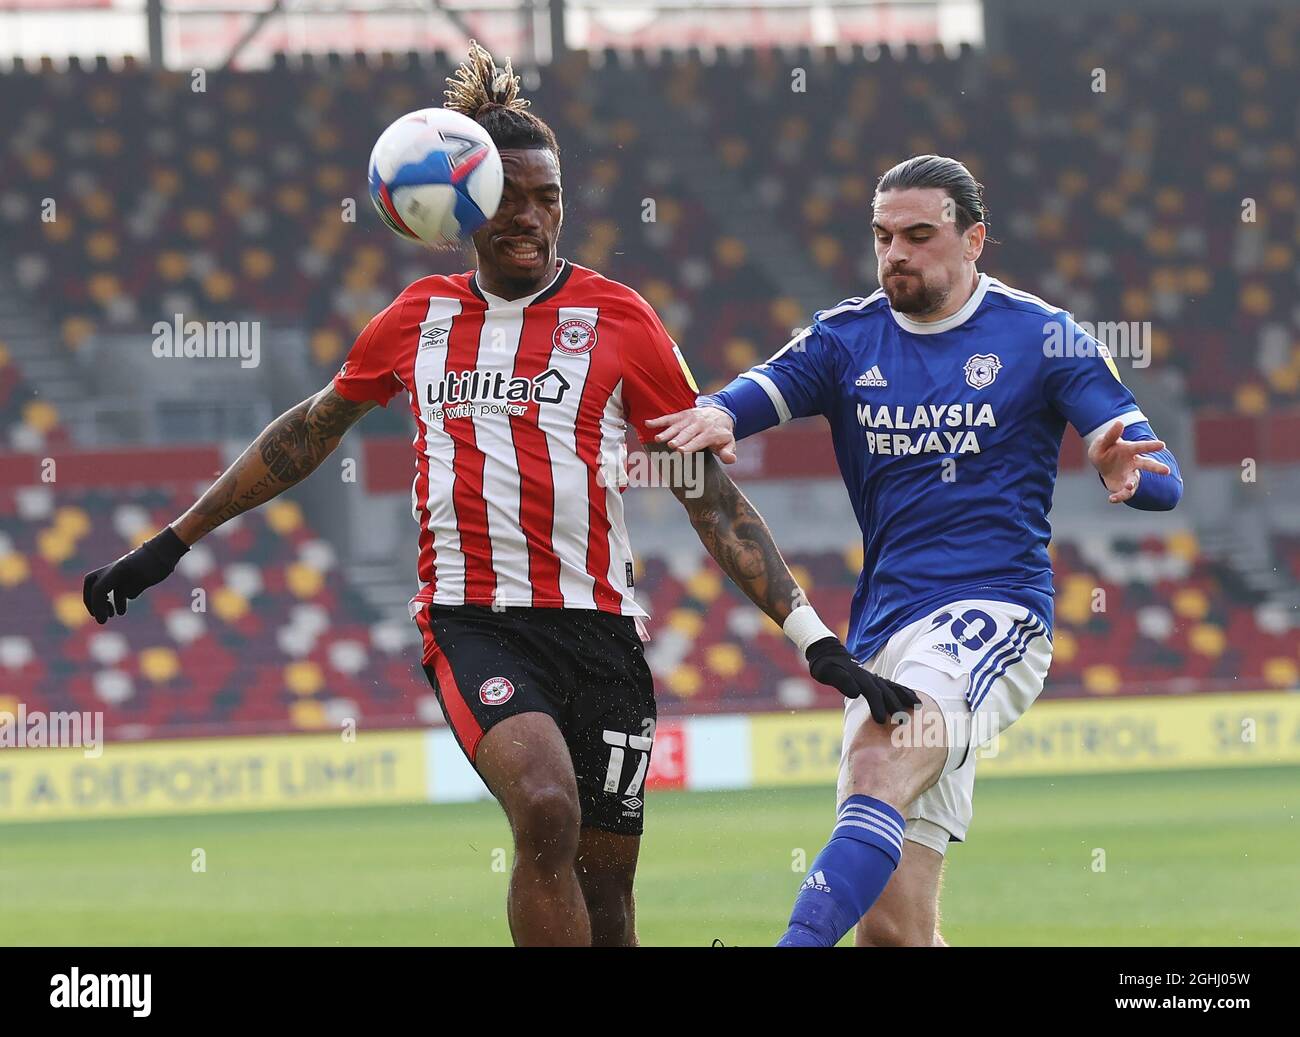 Brentford to face RC Strasbourg Alsace during pre-season trip to Germany